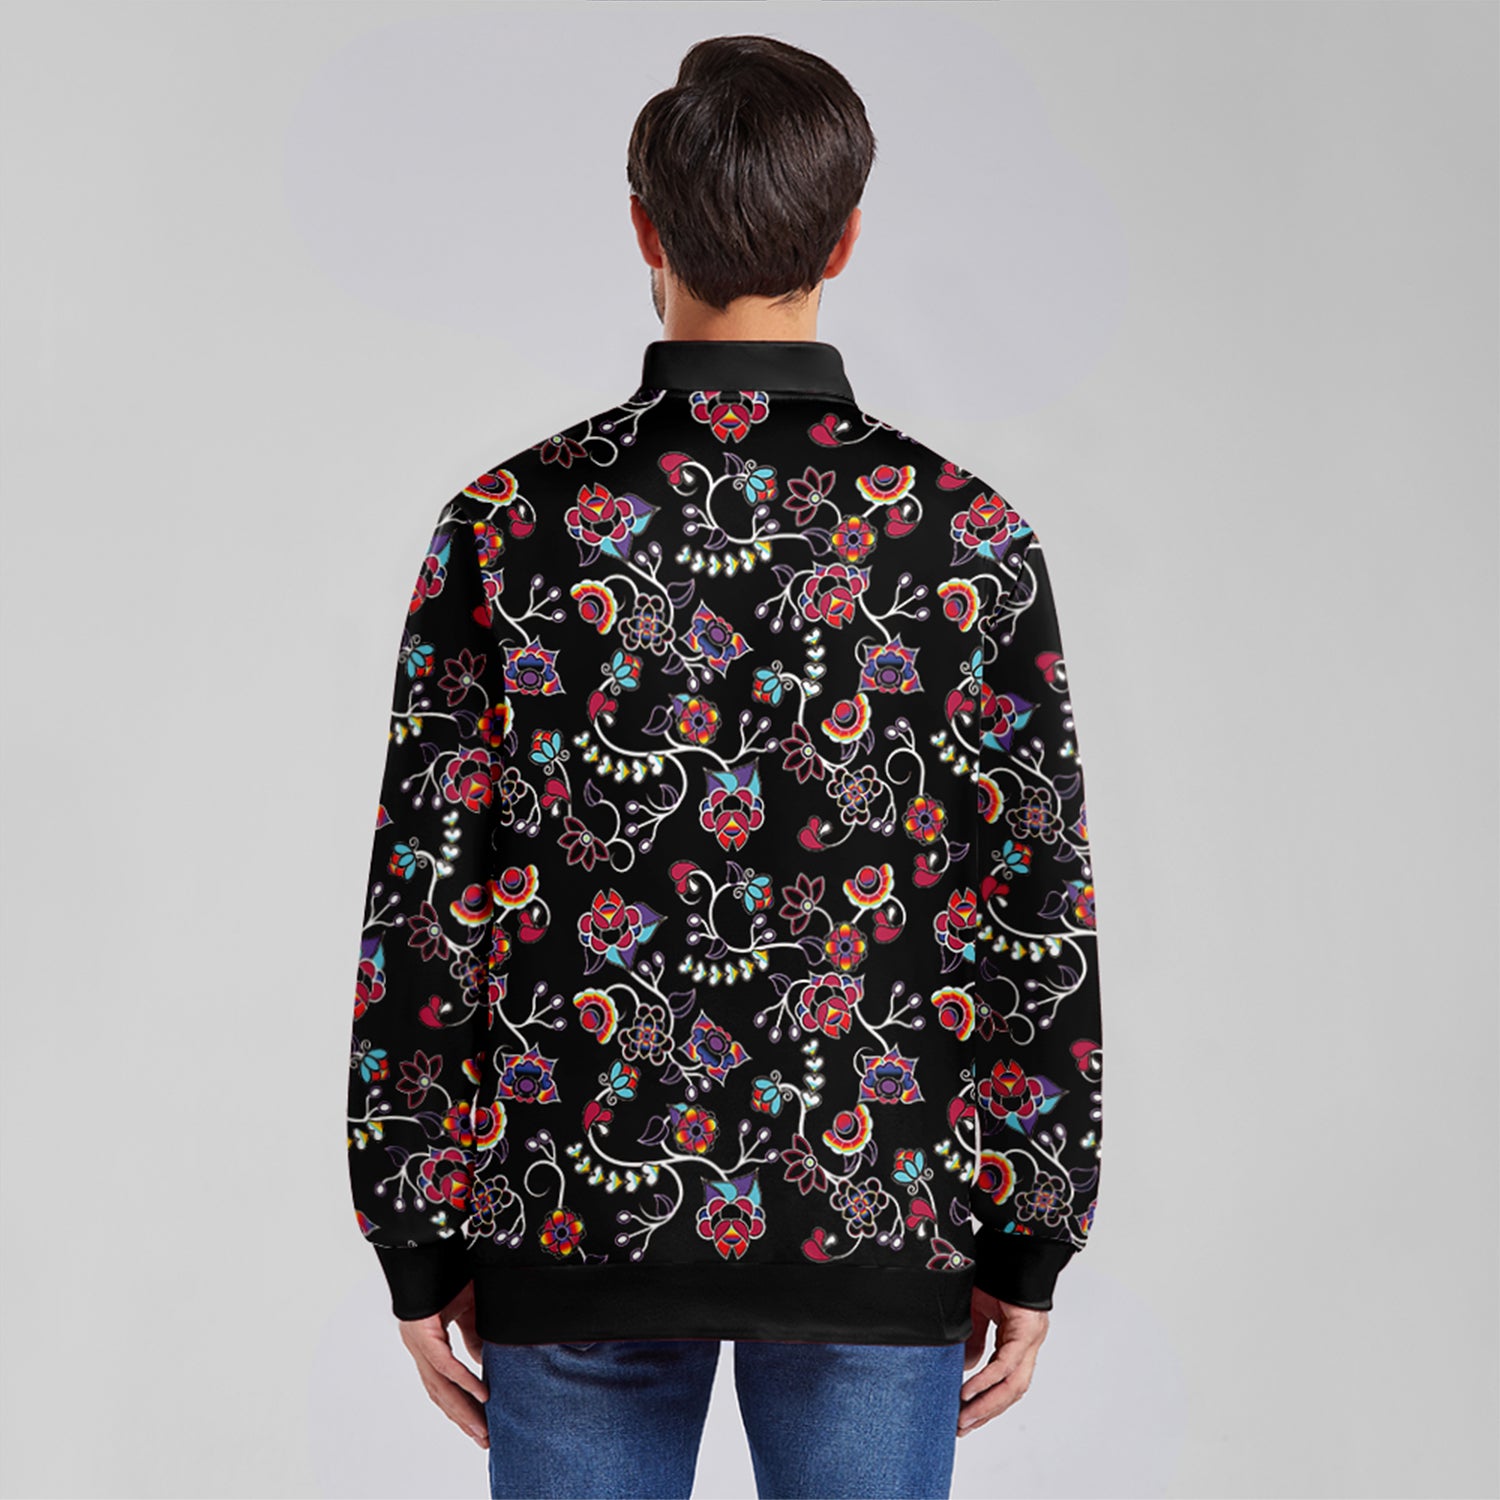 Floral Danseur Youth Zippered Collared Lightweight Jacket